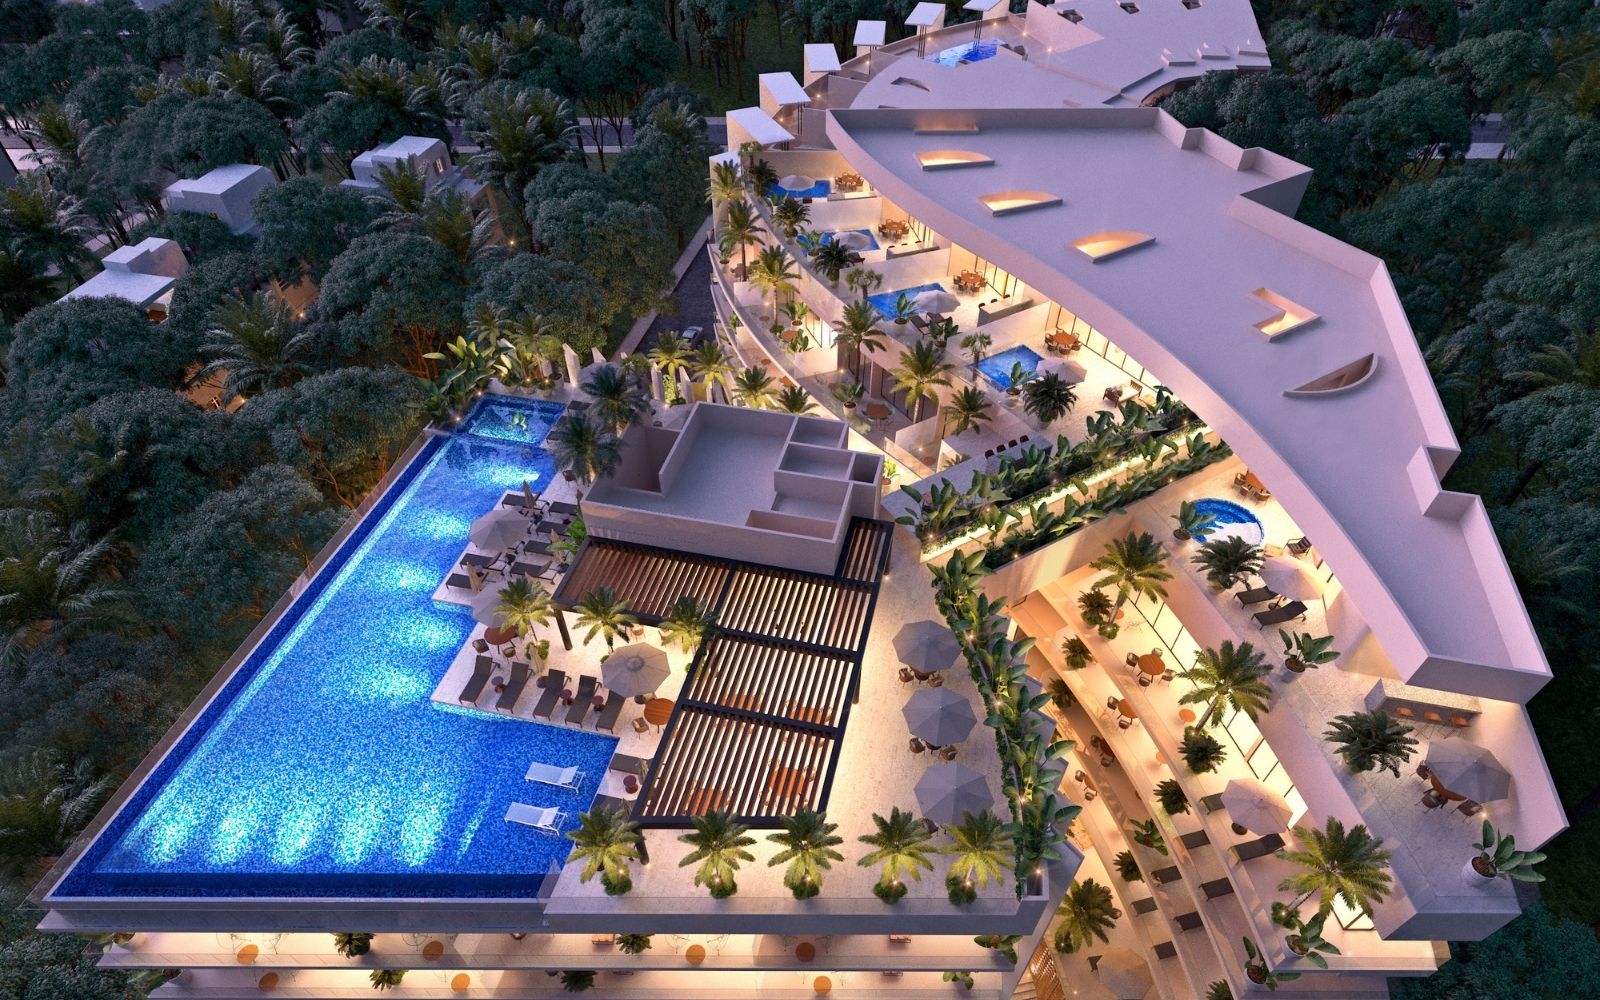 Condominium 4 pools, playground for children, Pet zone, gym, clubhouse, restaurant, terrace bar, concierge and more, for sale Playacar, Play